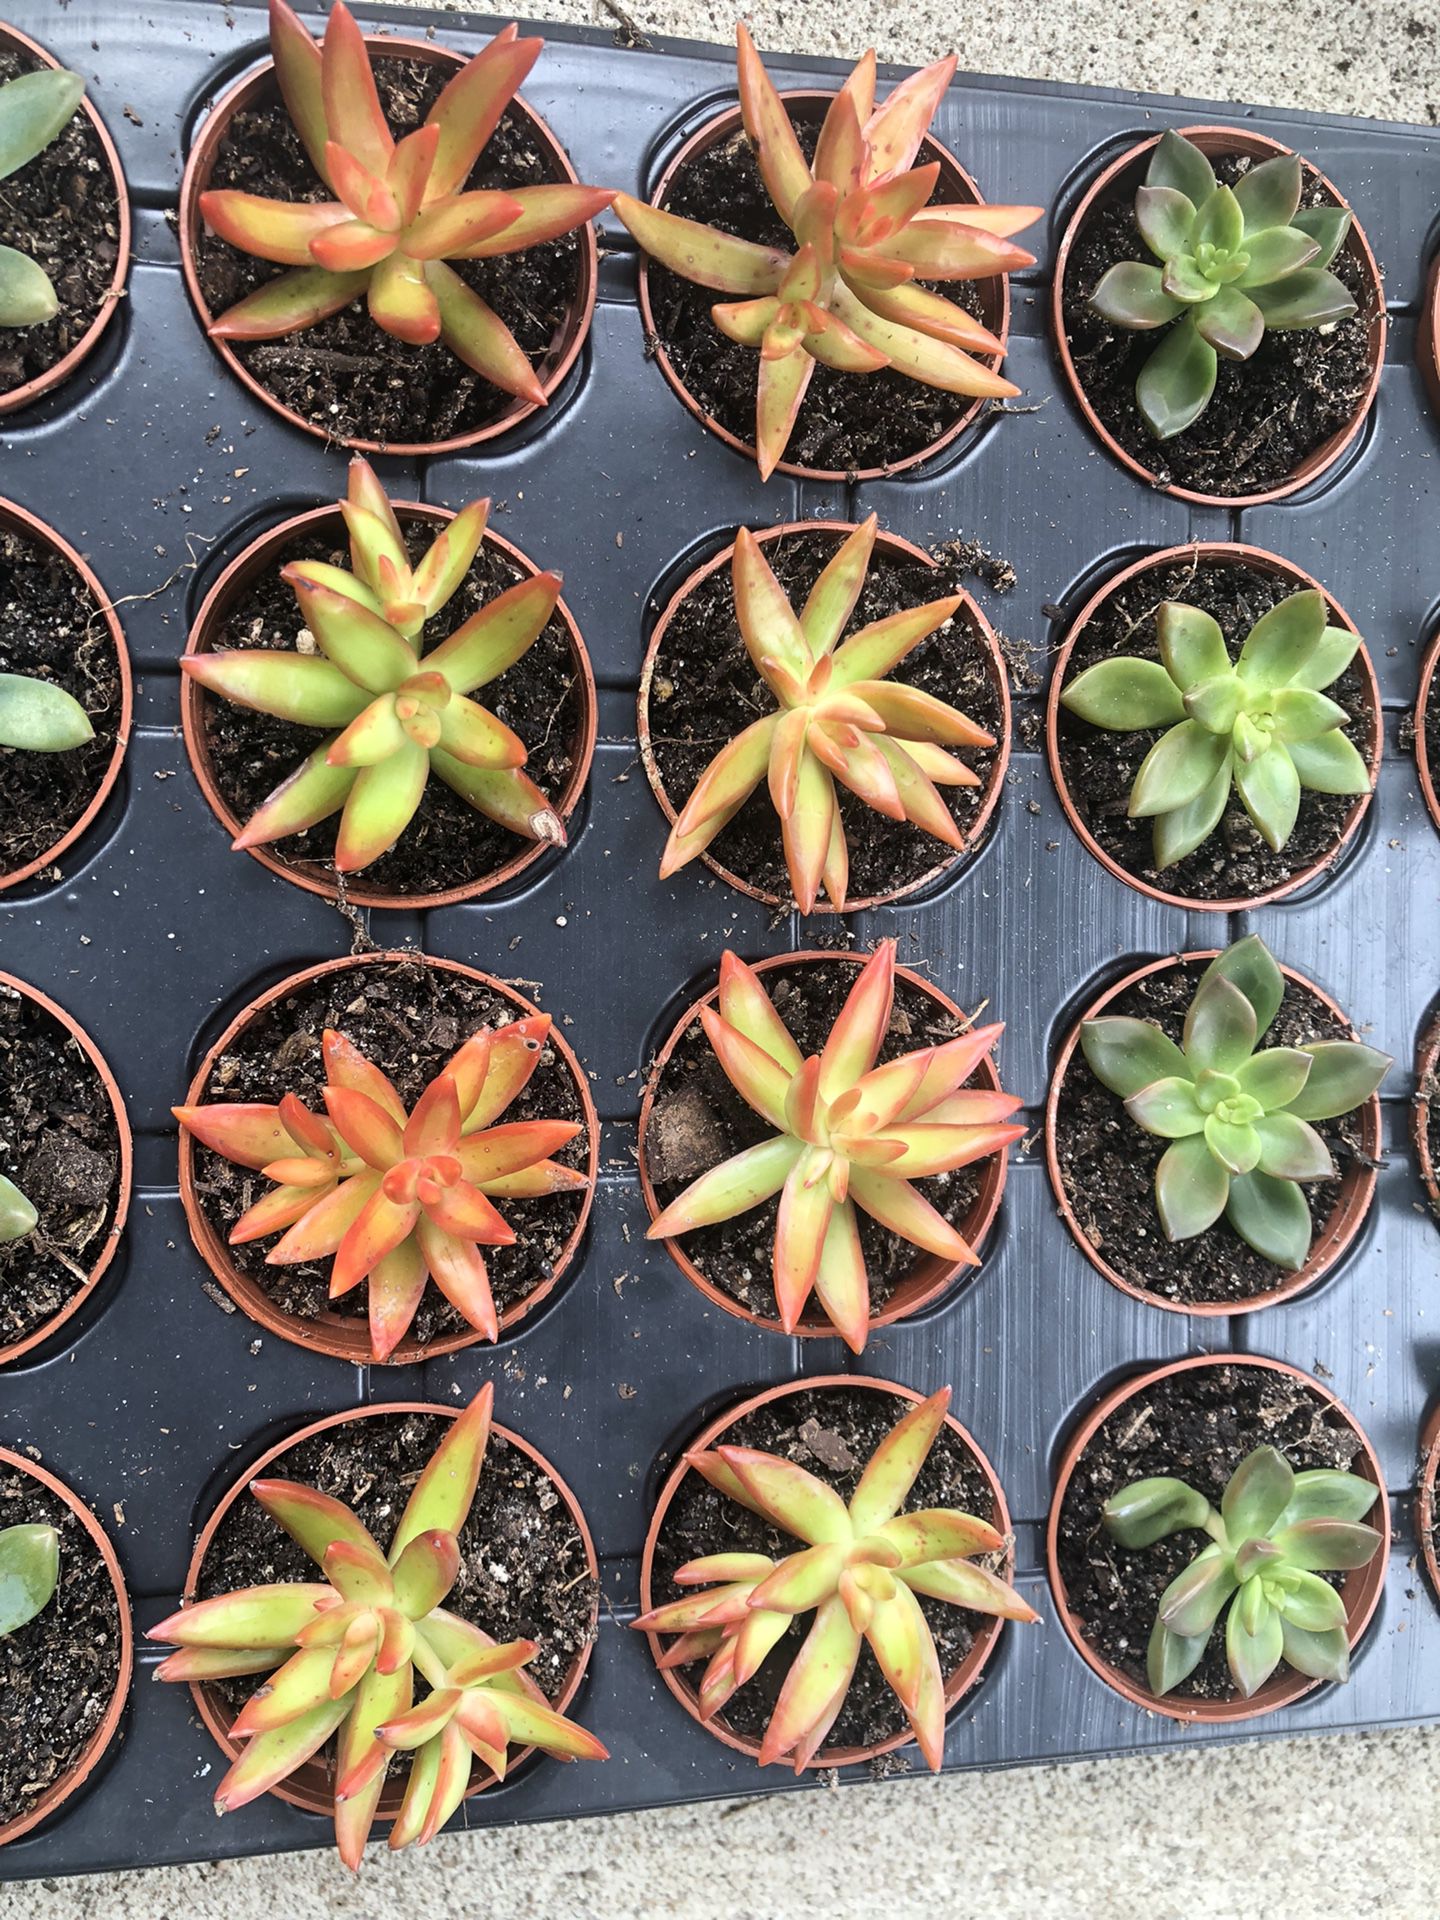 Succulents For Sale Cypress/Tomball Area